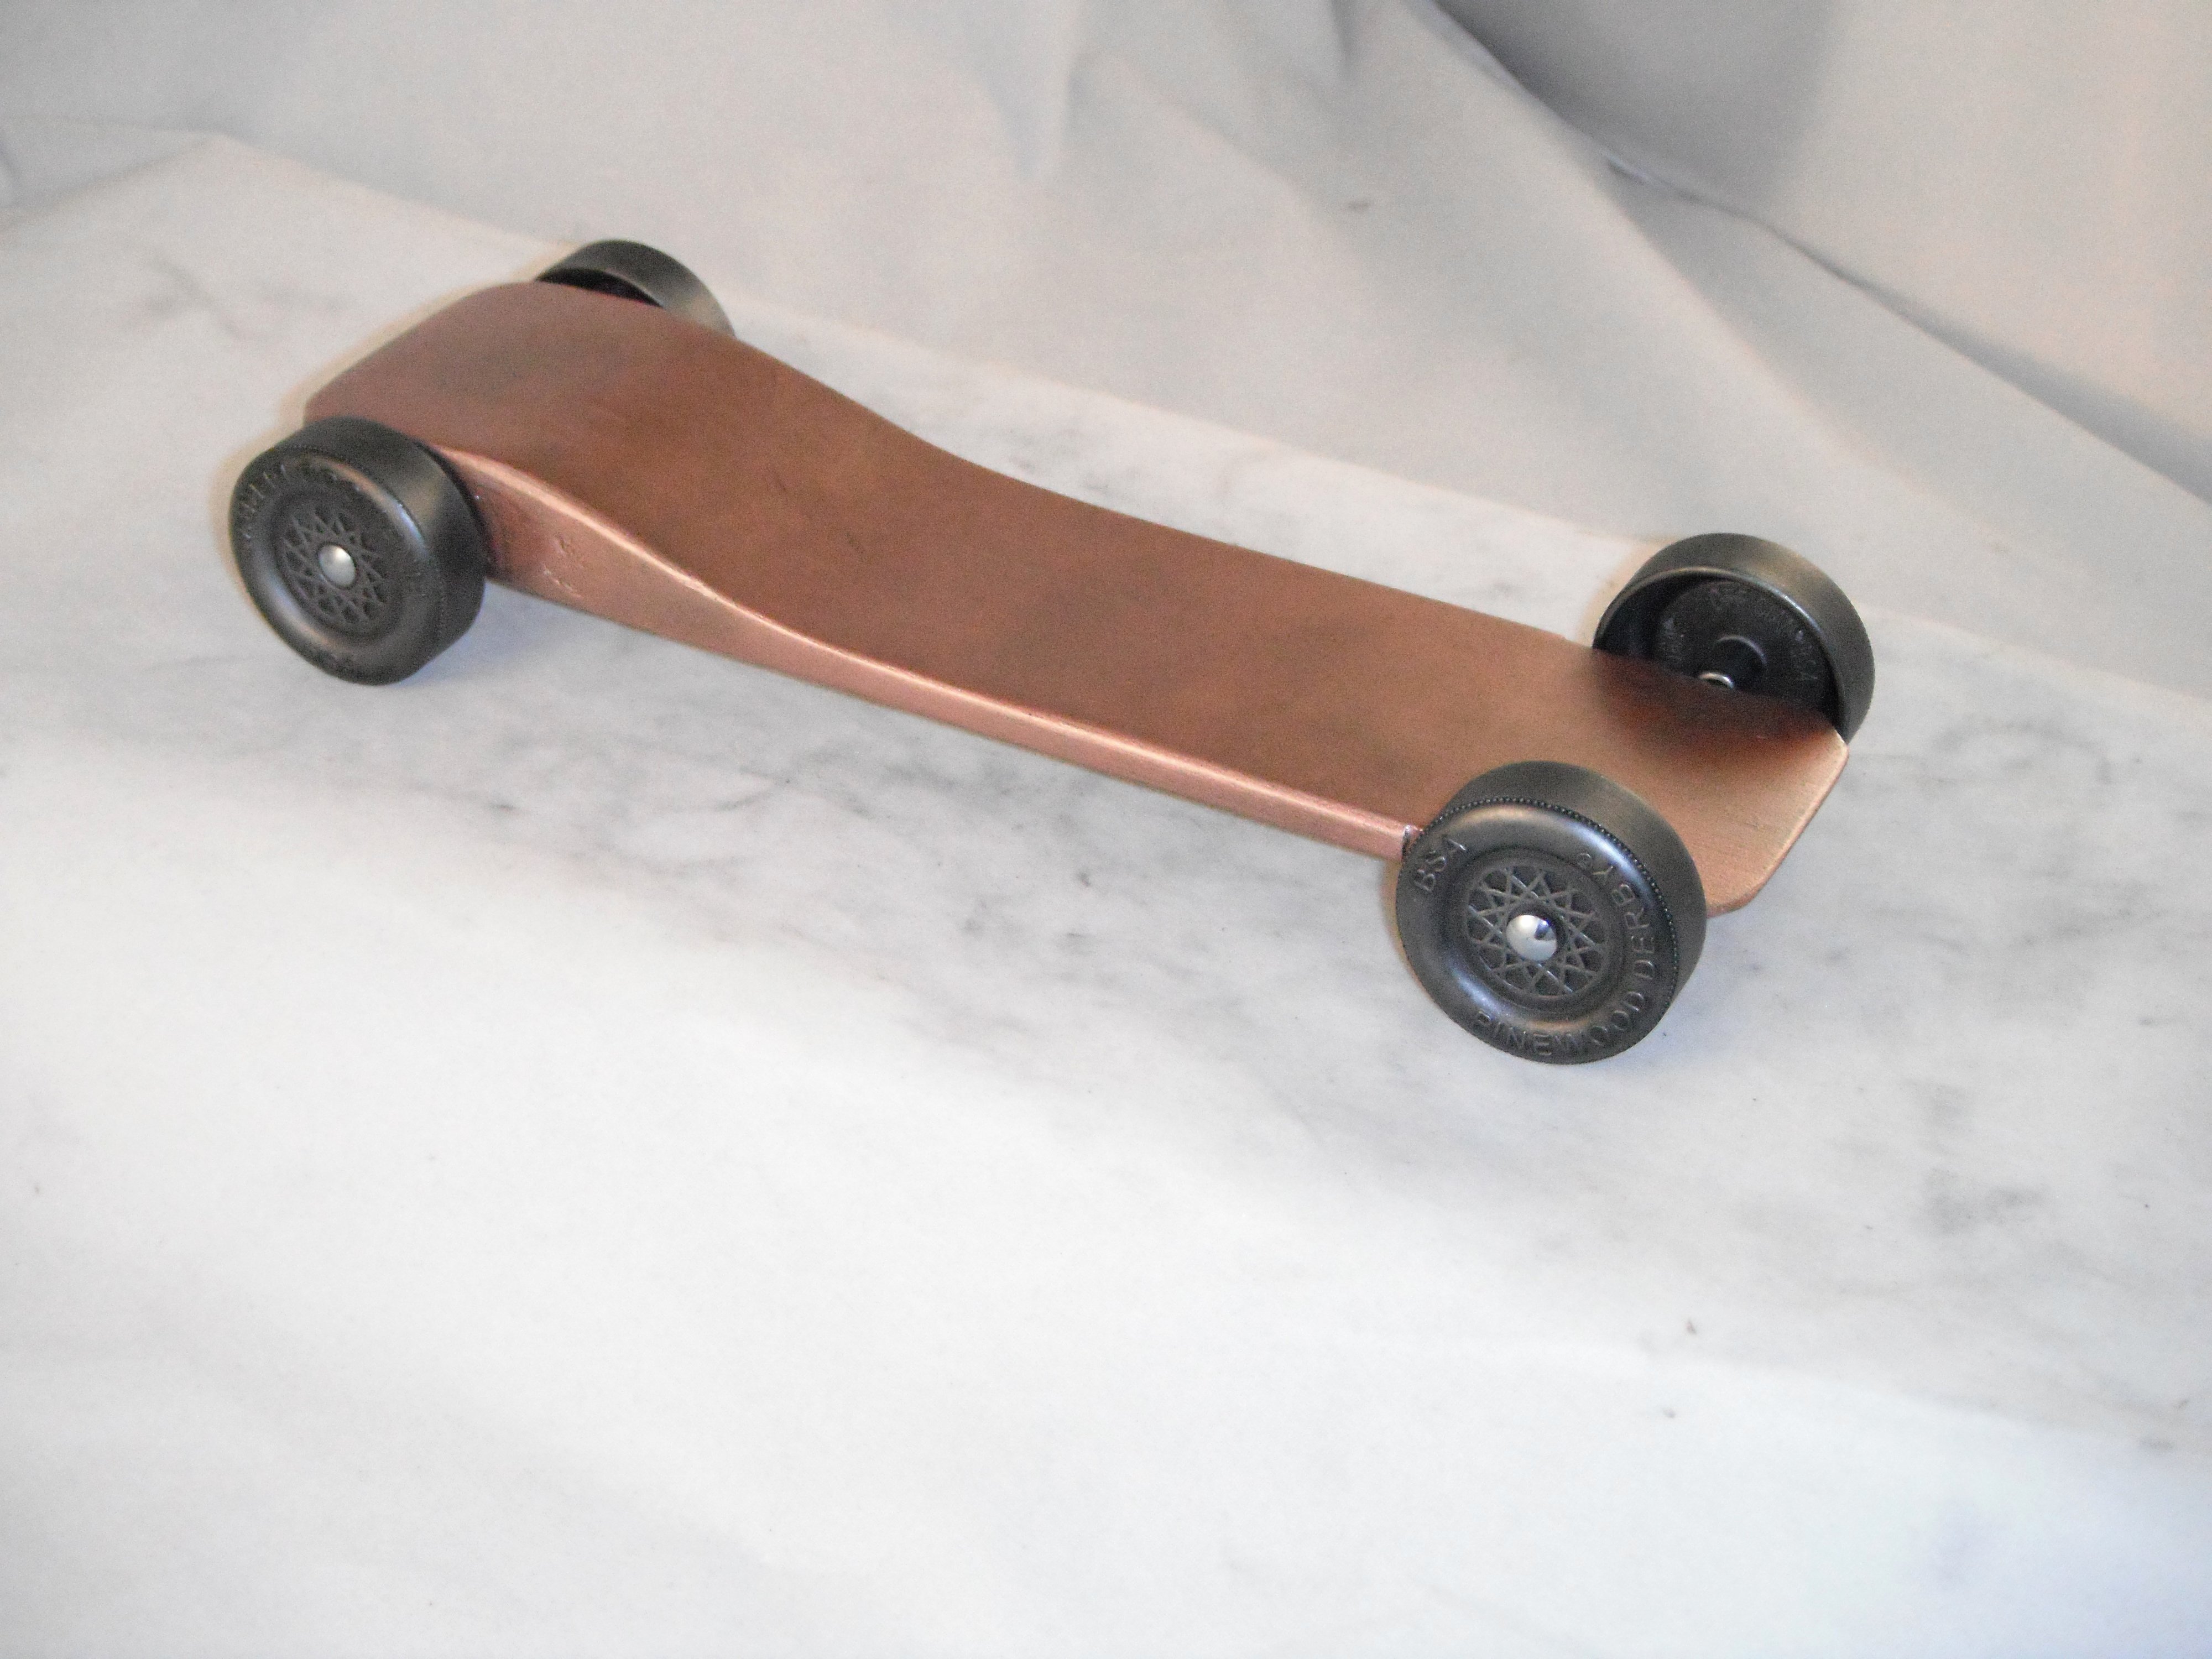 Pinewood Derby Car Shapes New Pinewood Derby Car Kit Fast Speed Ready to assemble Warped